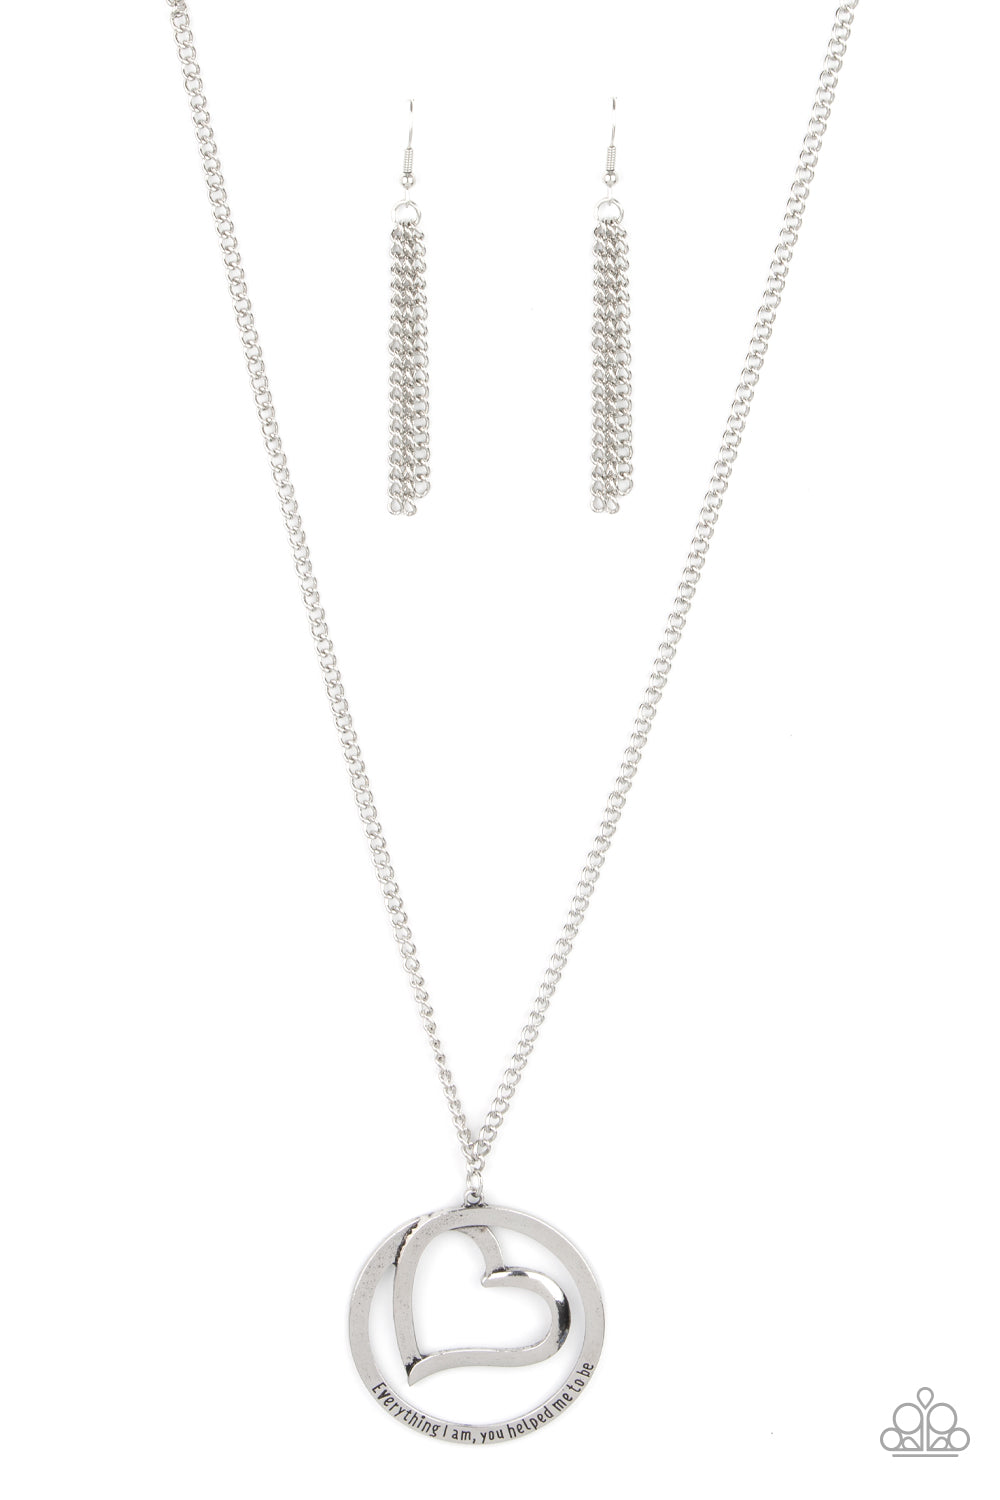 Paparazzi Accessories - Positively Perfect - Silver Necklace - Bling By Titia Boutique